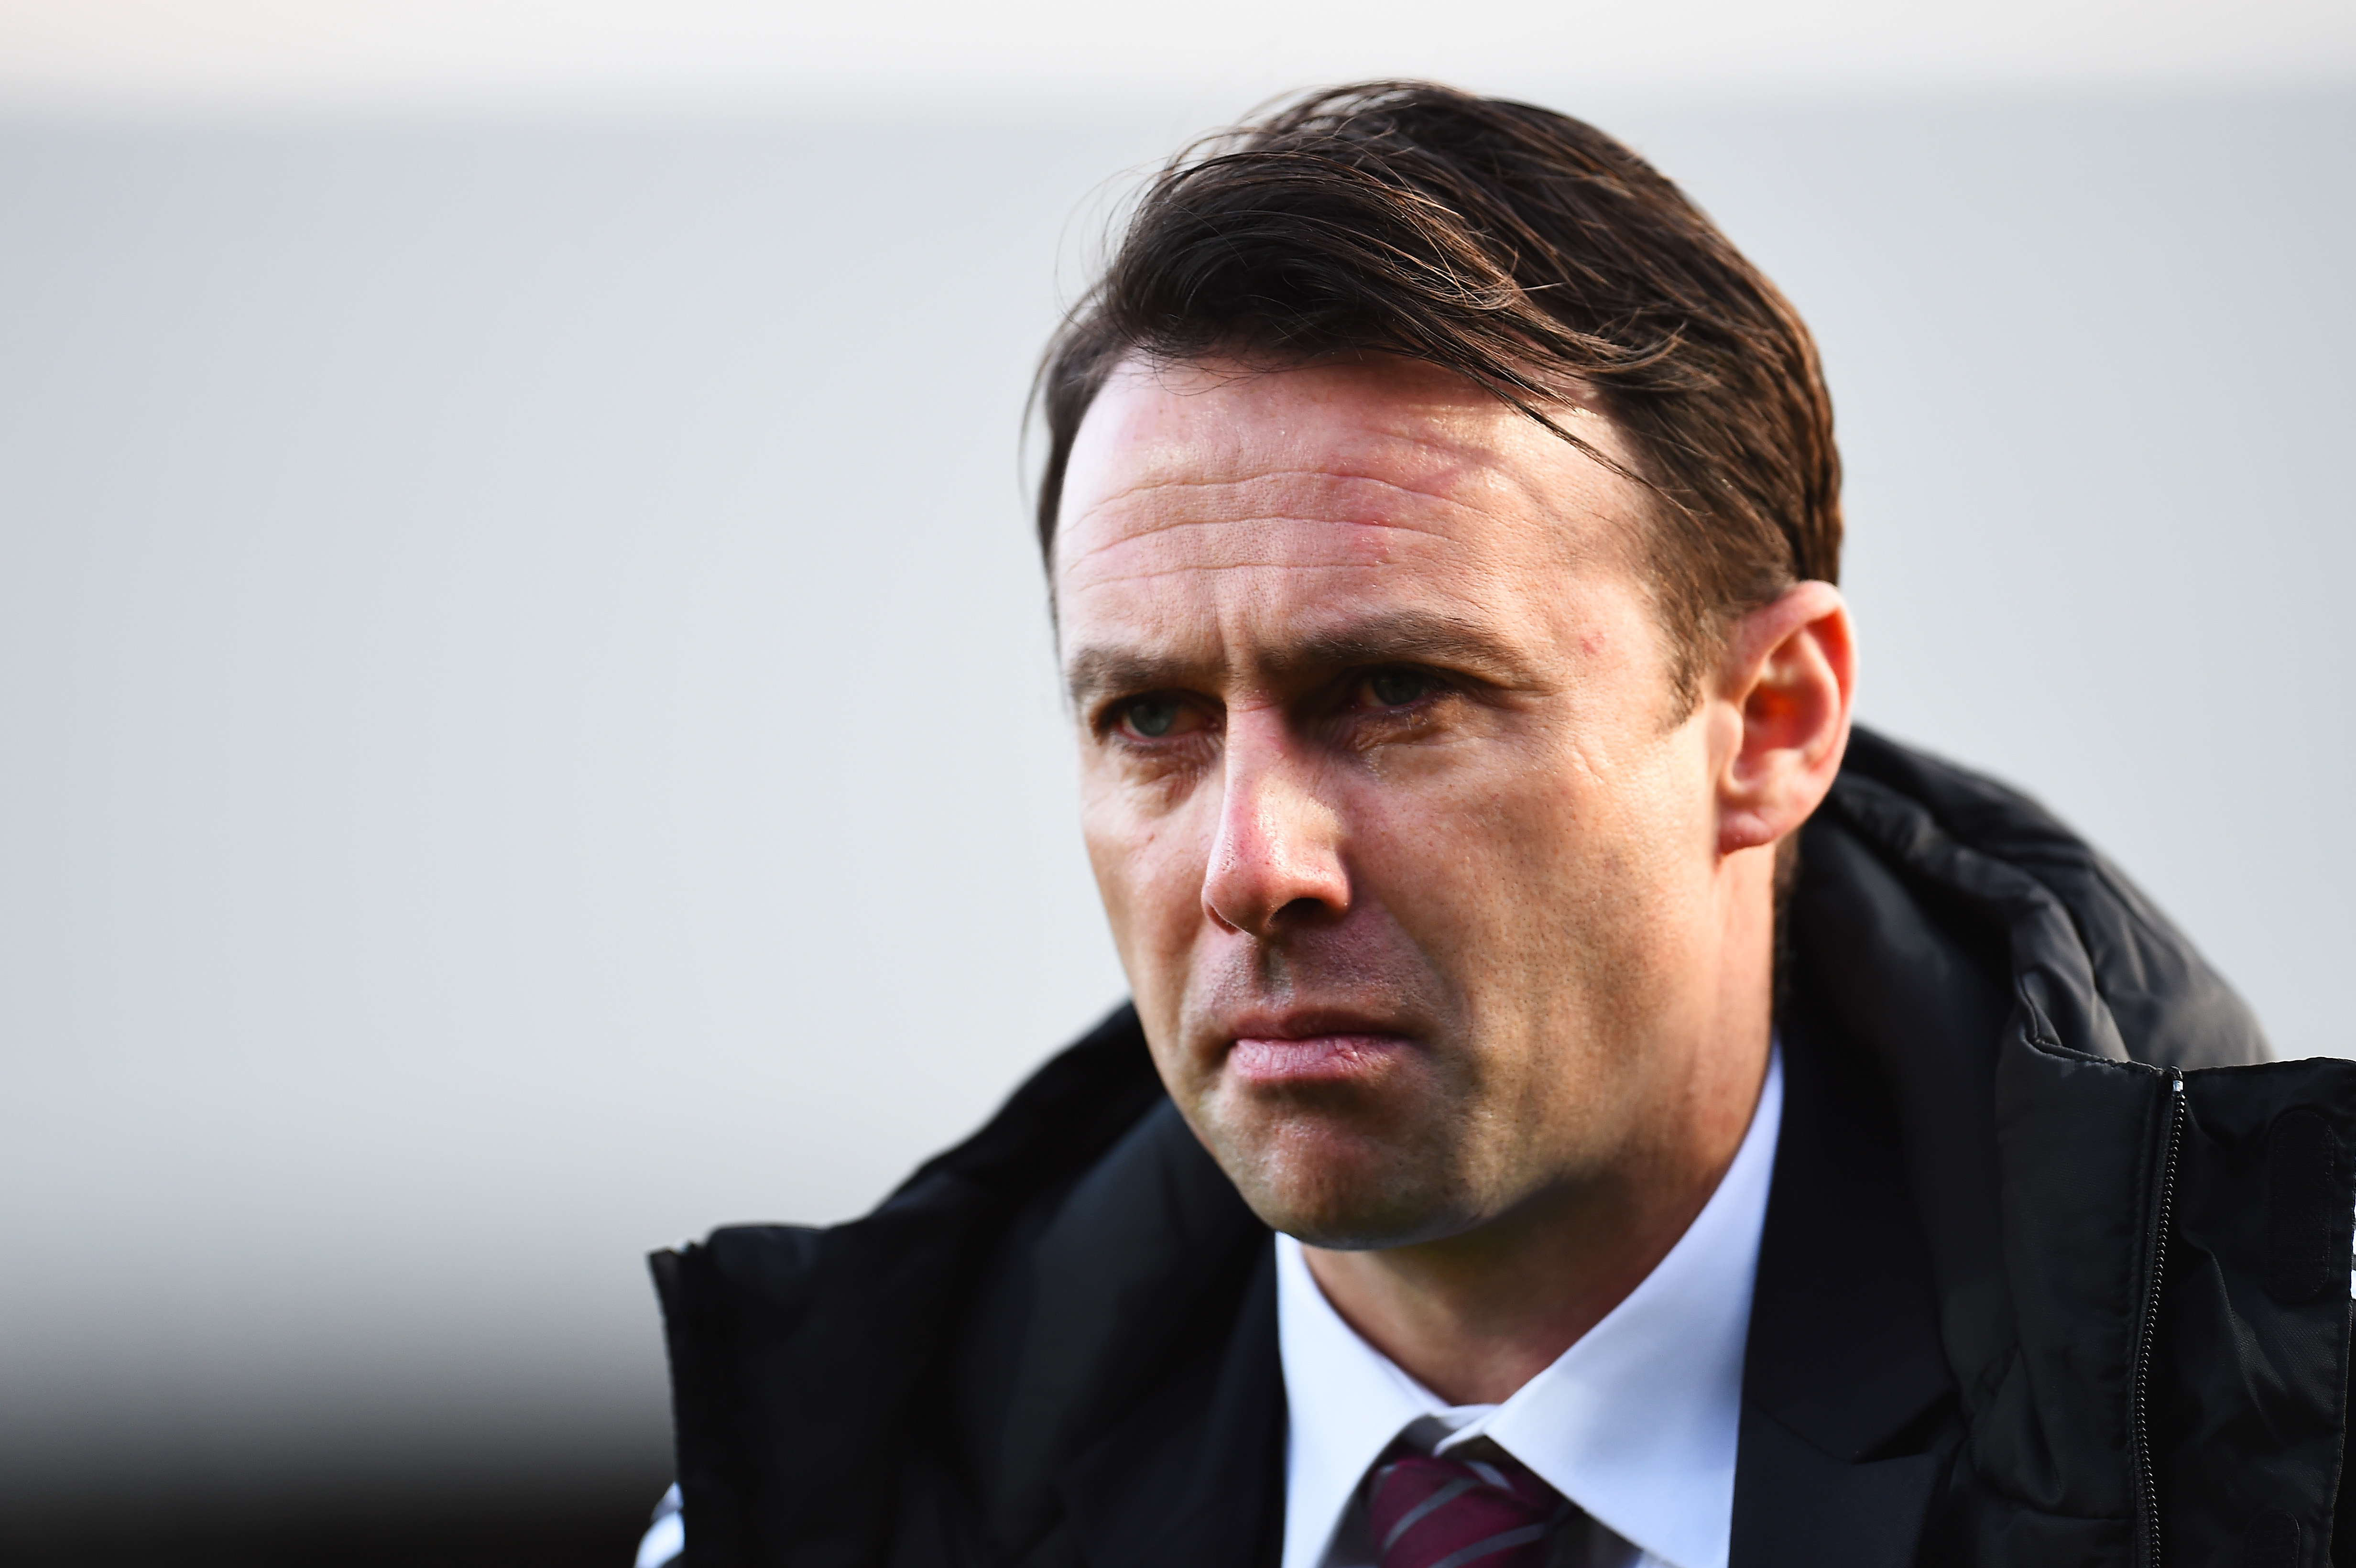 Crystal Palace sporting director Dougie Freedman has turned down Newcastle